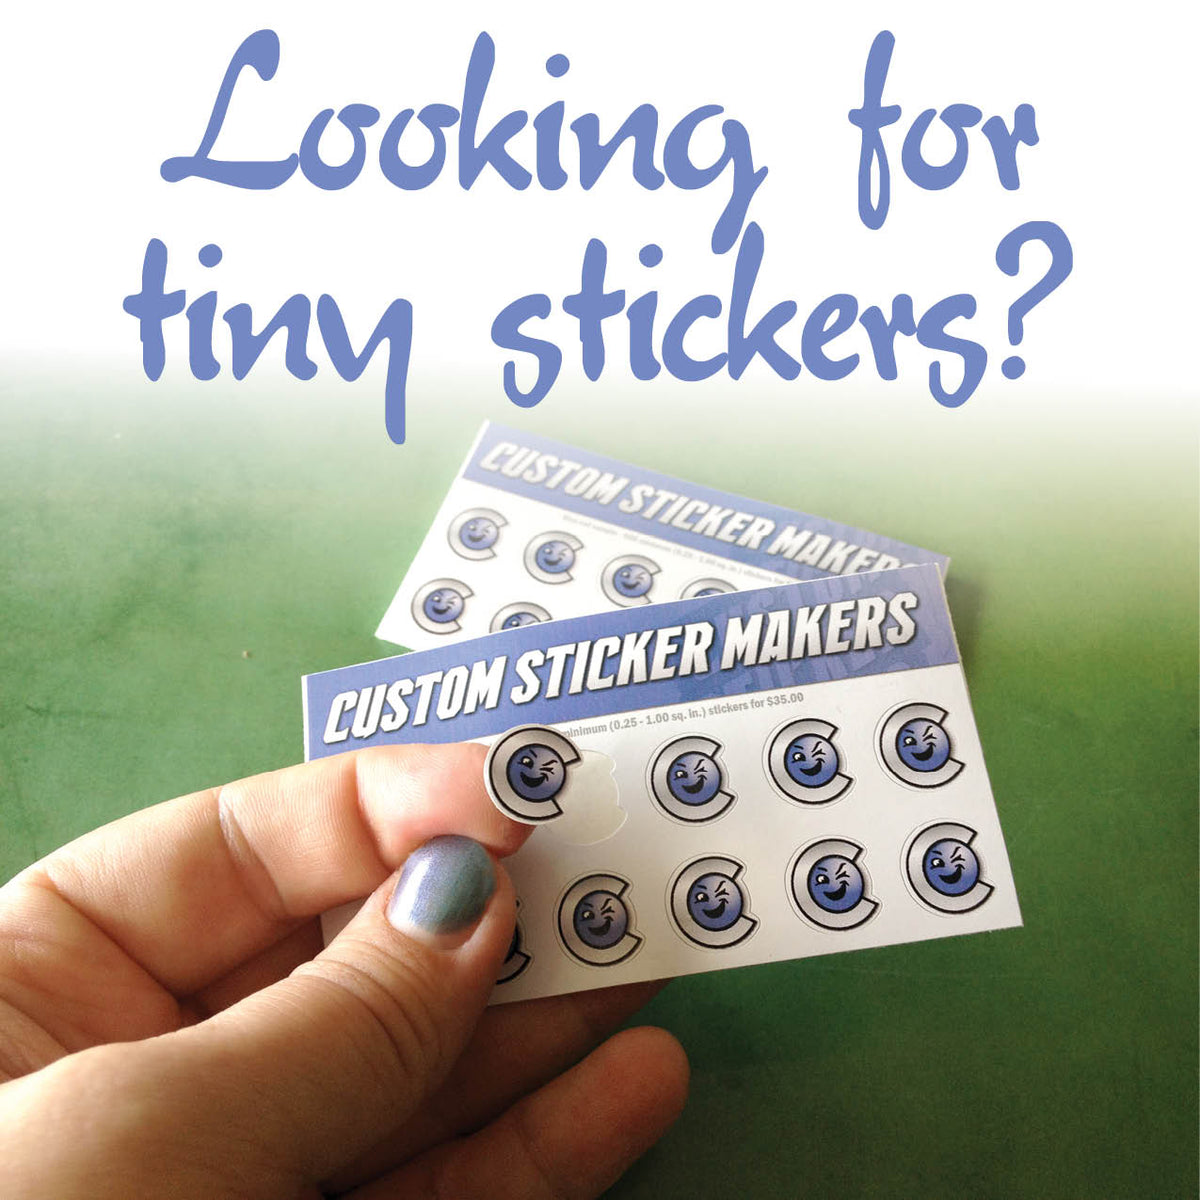 Custom Sticker Makers - Looking For tiny Stickers?